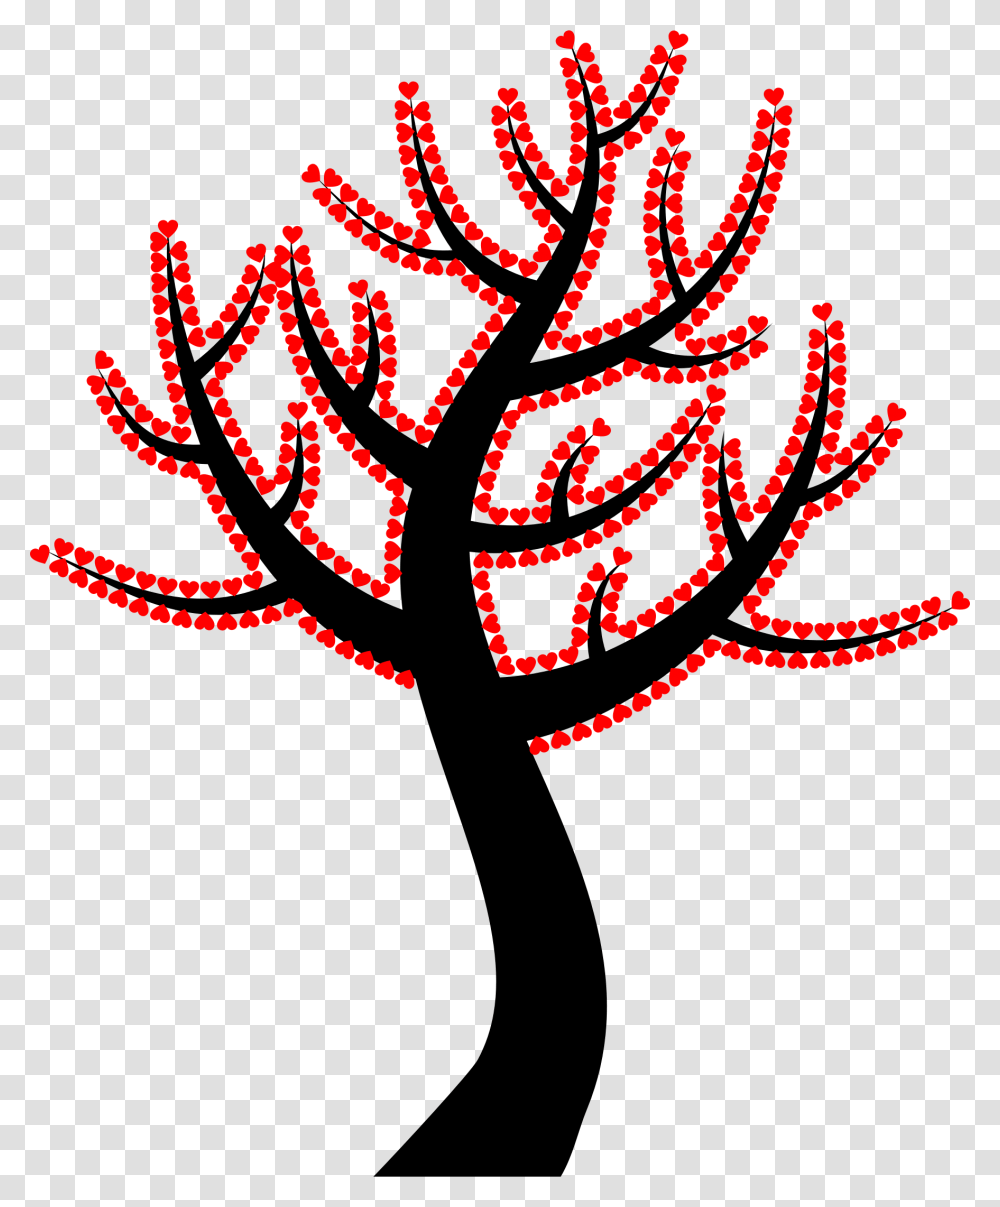 This Free Icons Design Of Valentine Hearts Tree Simple Tree Pics Art, Poster, Advertisement, Pac Man Transparent Png